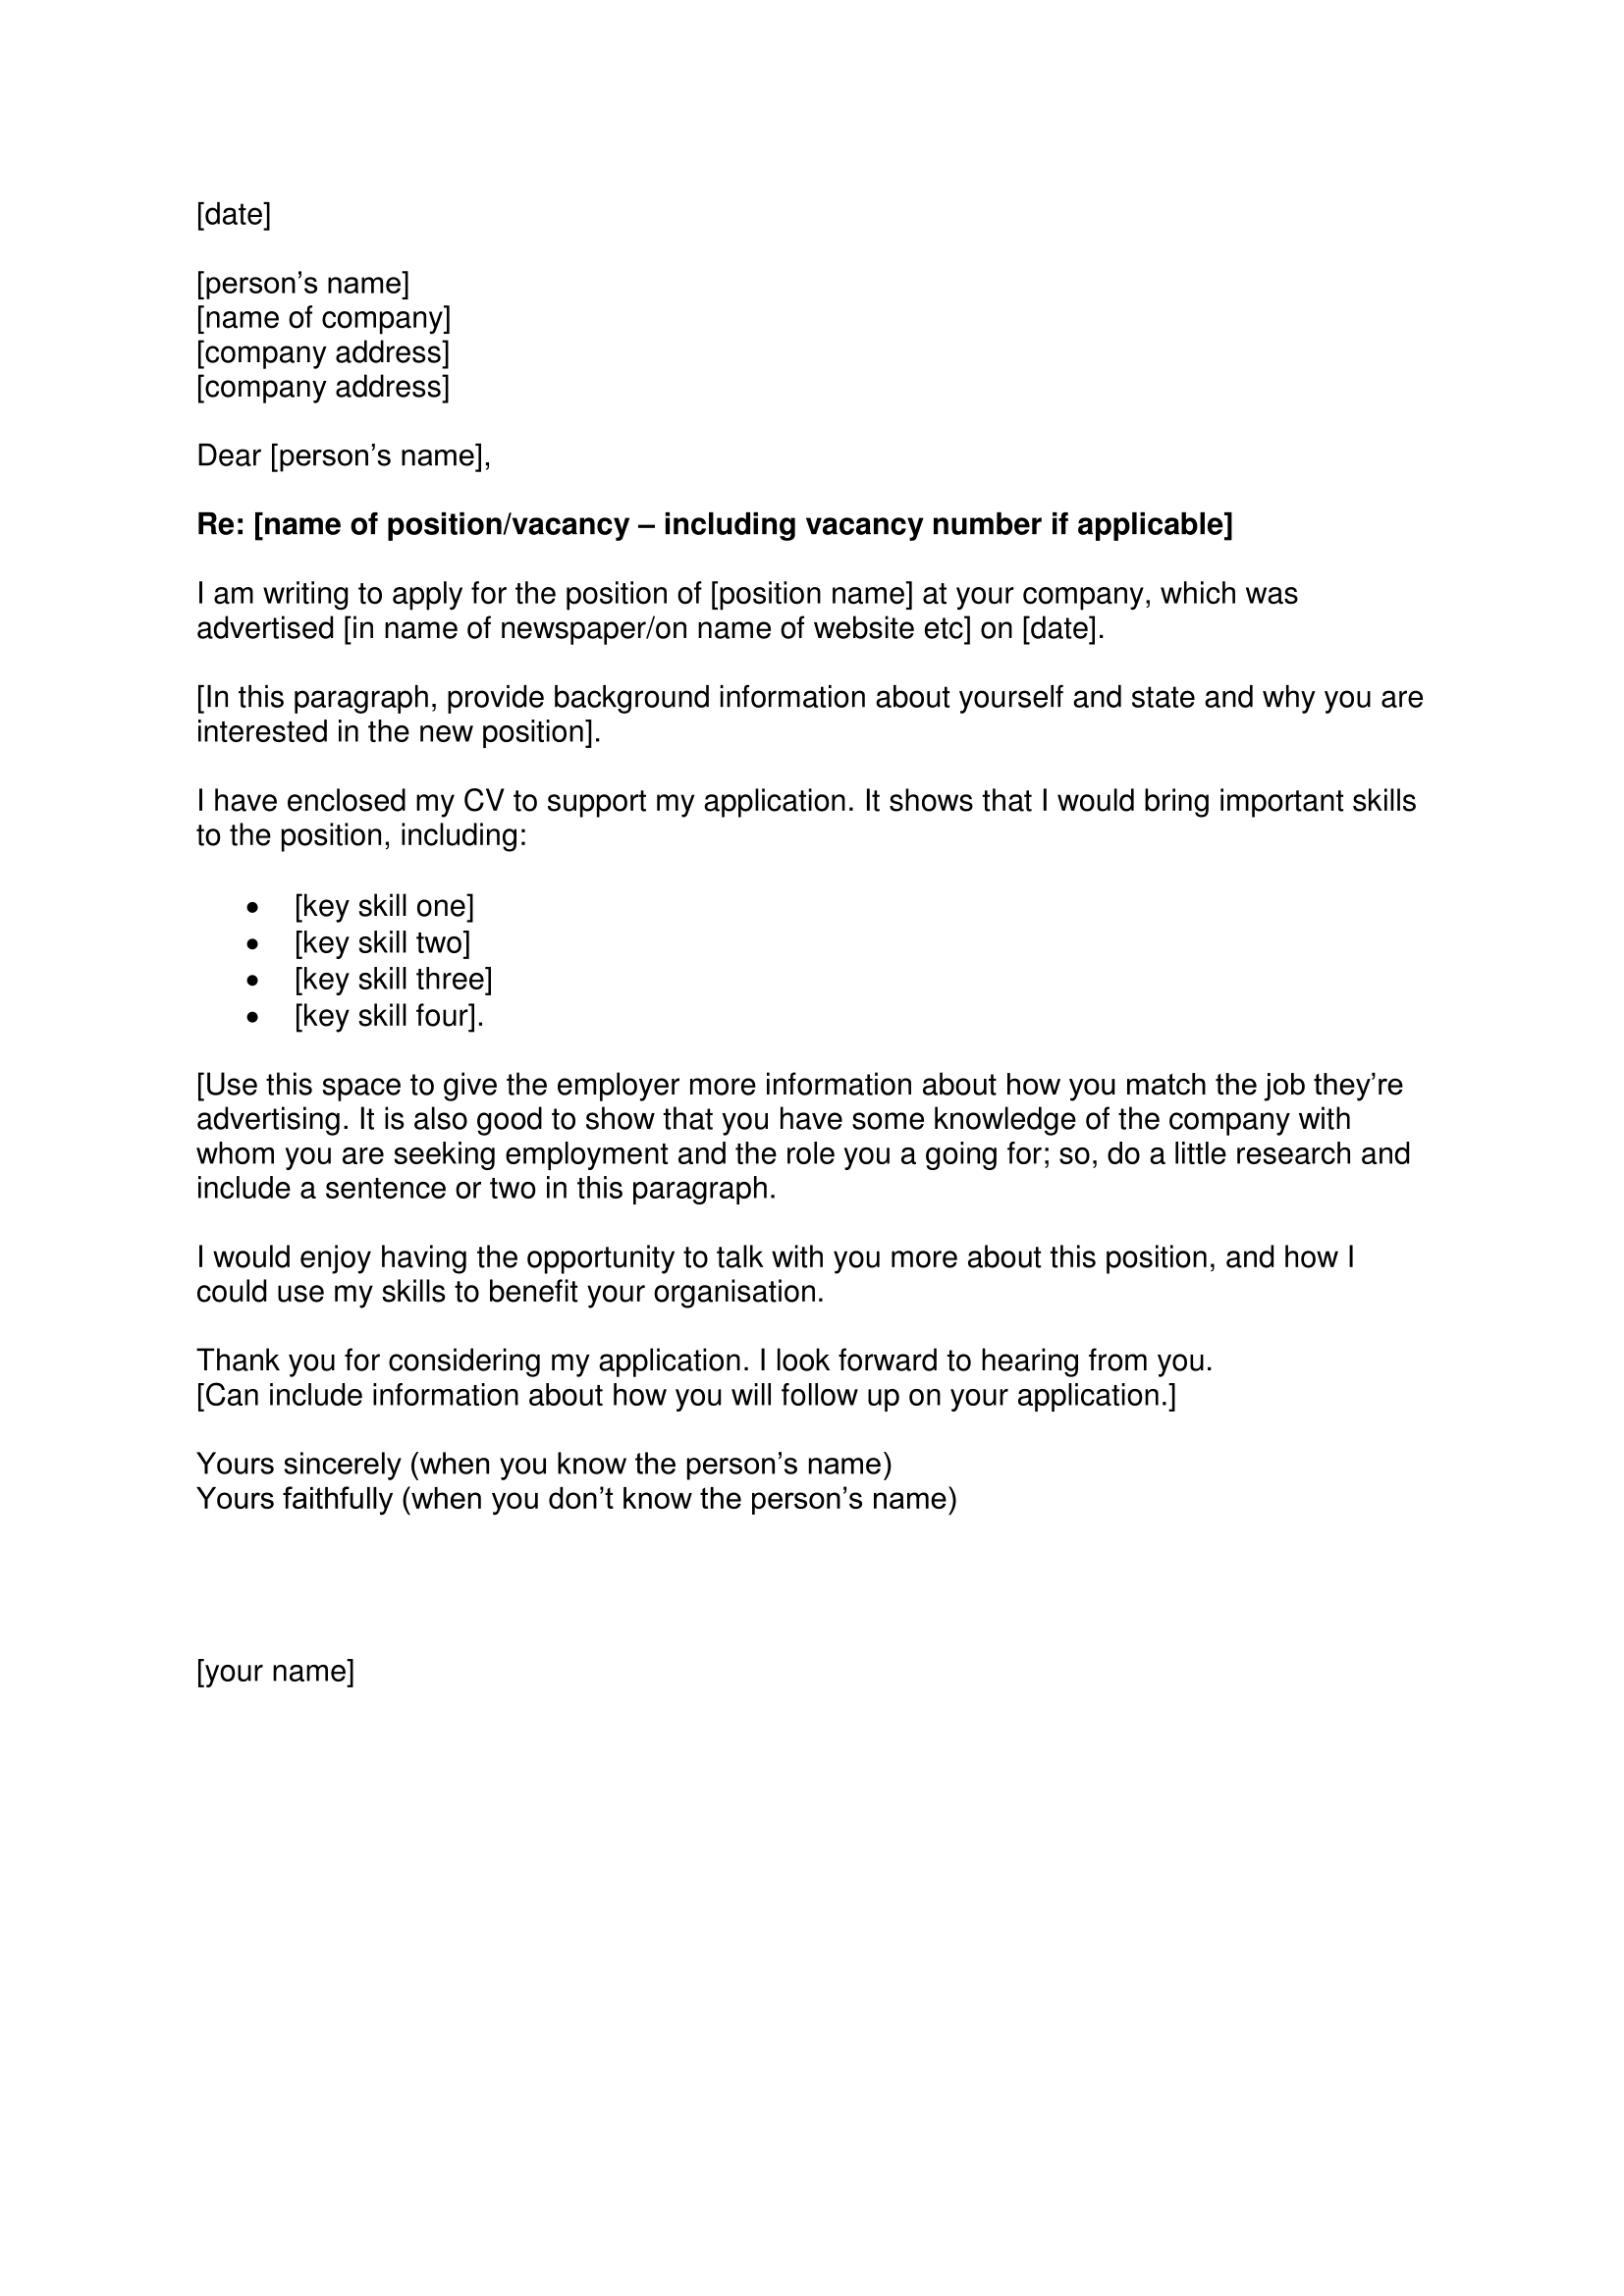 Office management specialist resume